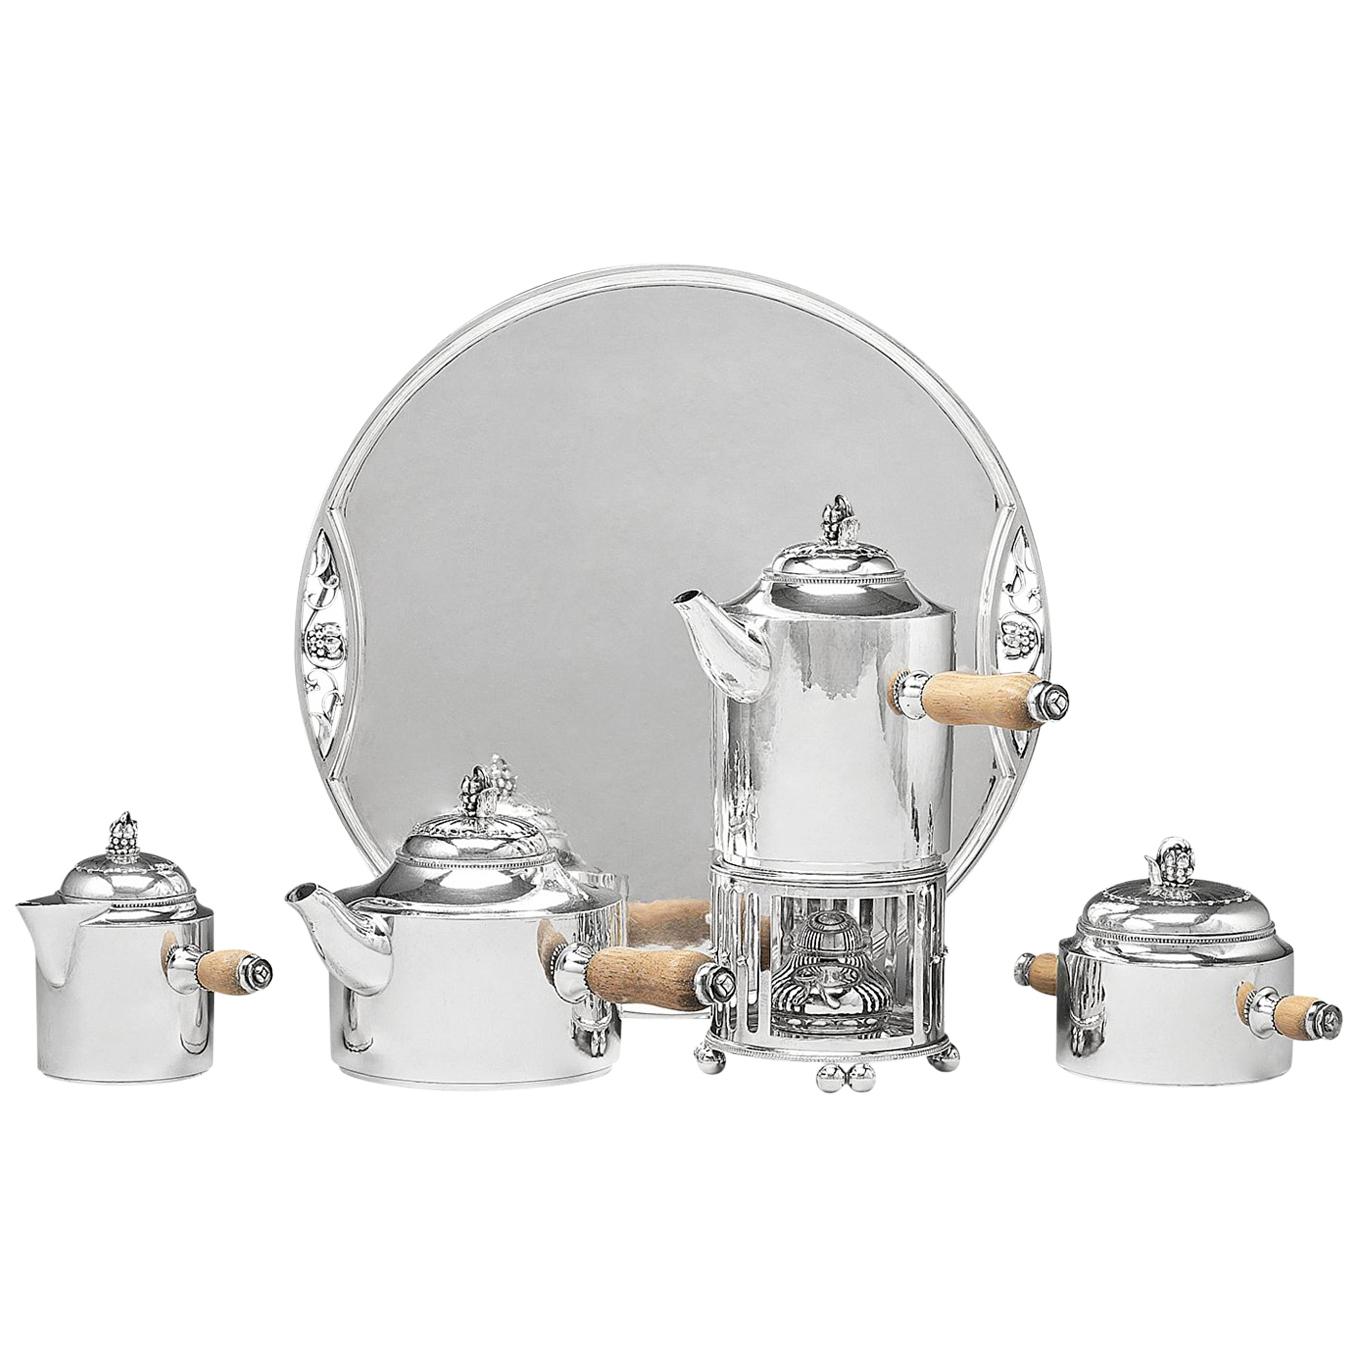 Rare Georg Jensen Paris Coffee and Tea Service with Burner and Tray 483